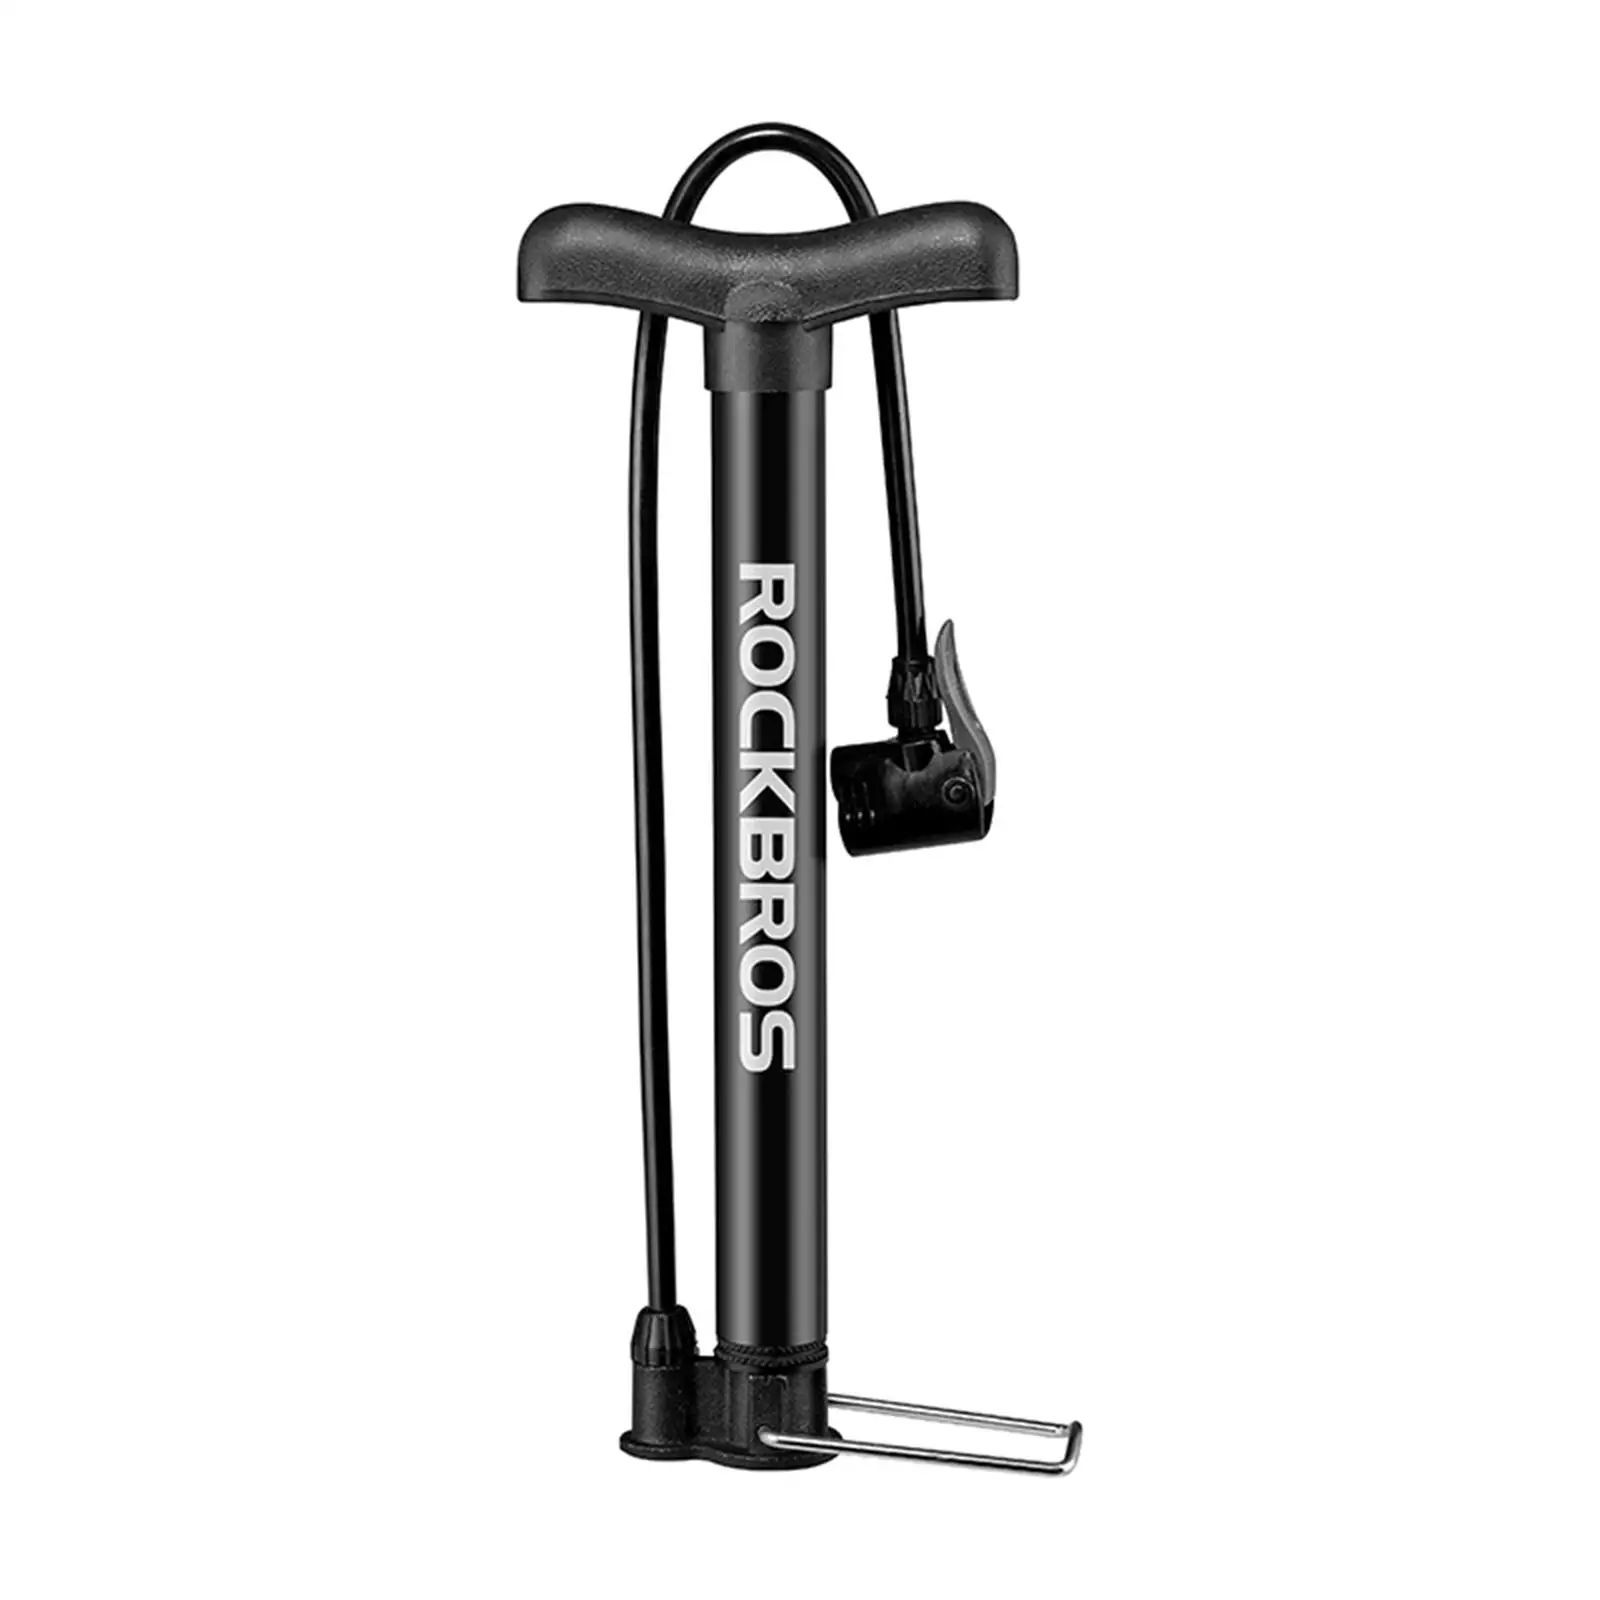 Mini High Pressure Floor Pump Compatible with Universal  and  Valve Durable Portable Inflator Pump Hand Air for Fat Tires Bike